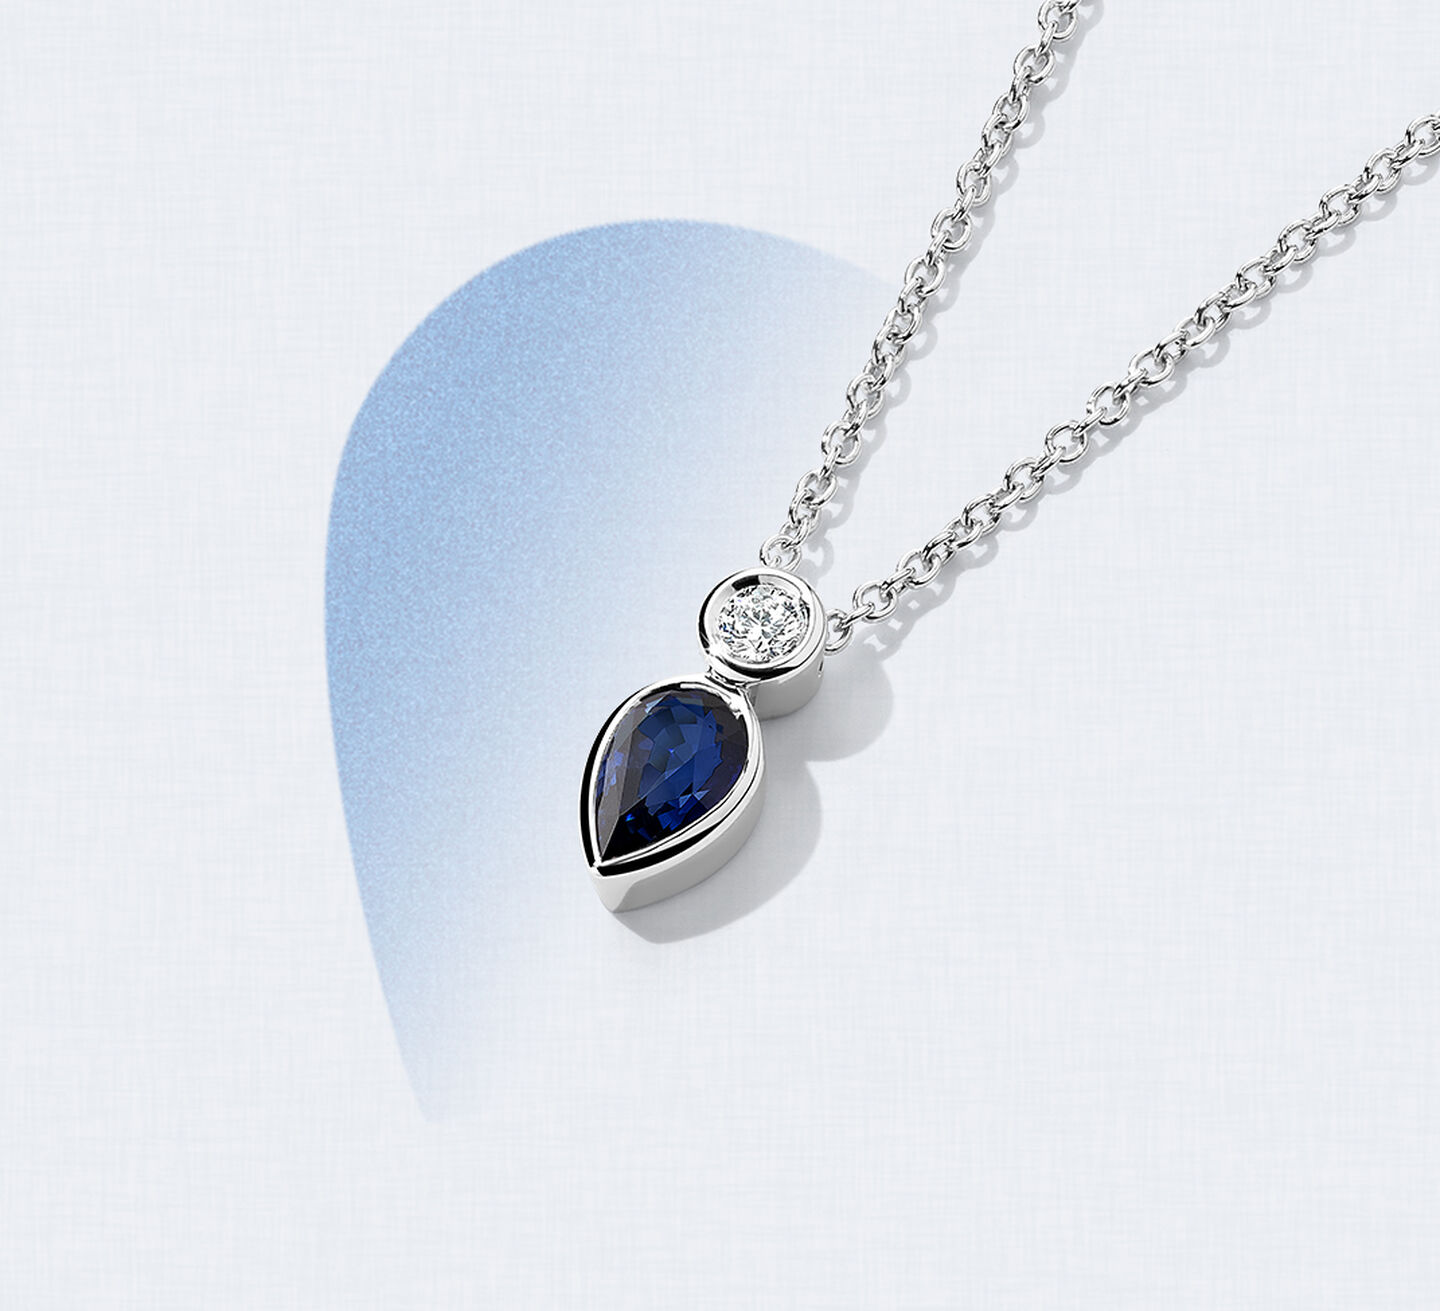 A sapphire pendant on white gold chain with a diamond accent stone